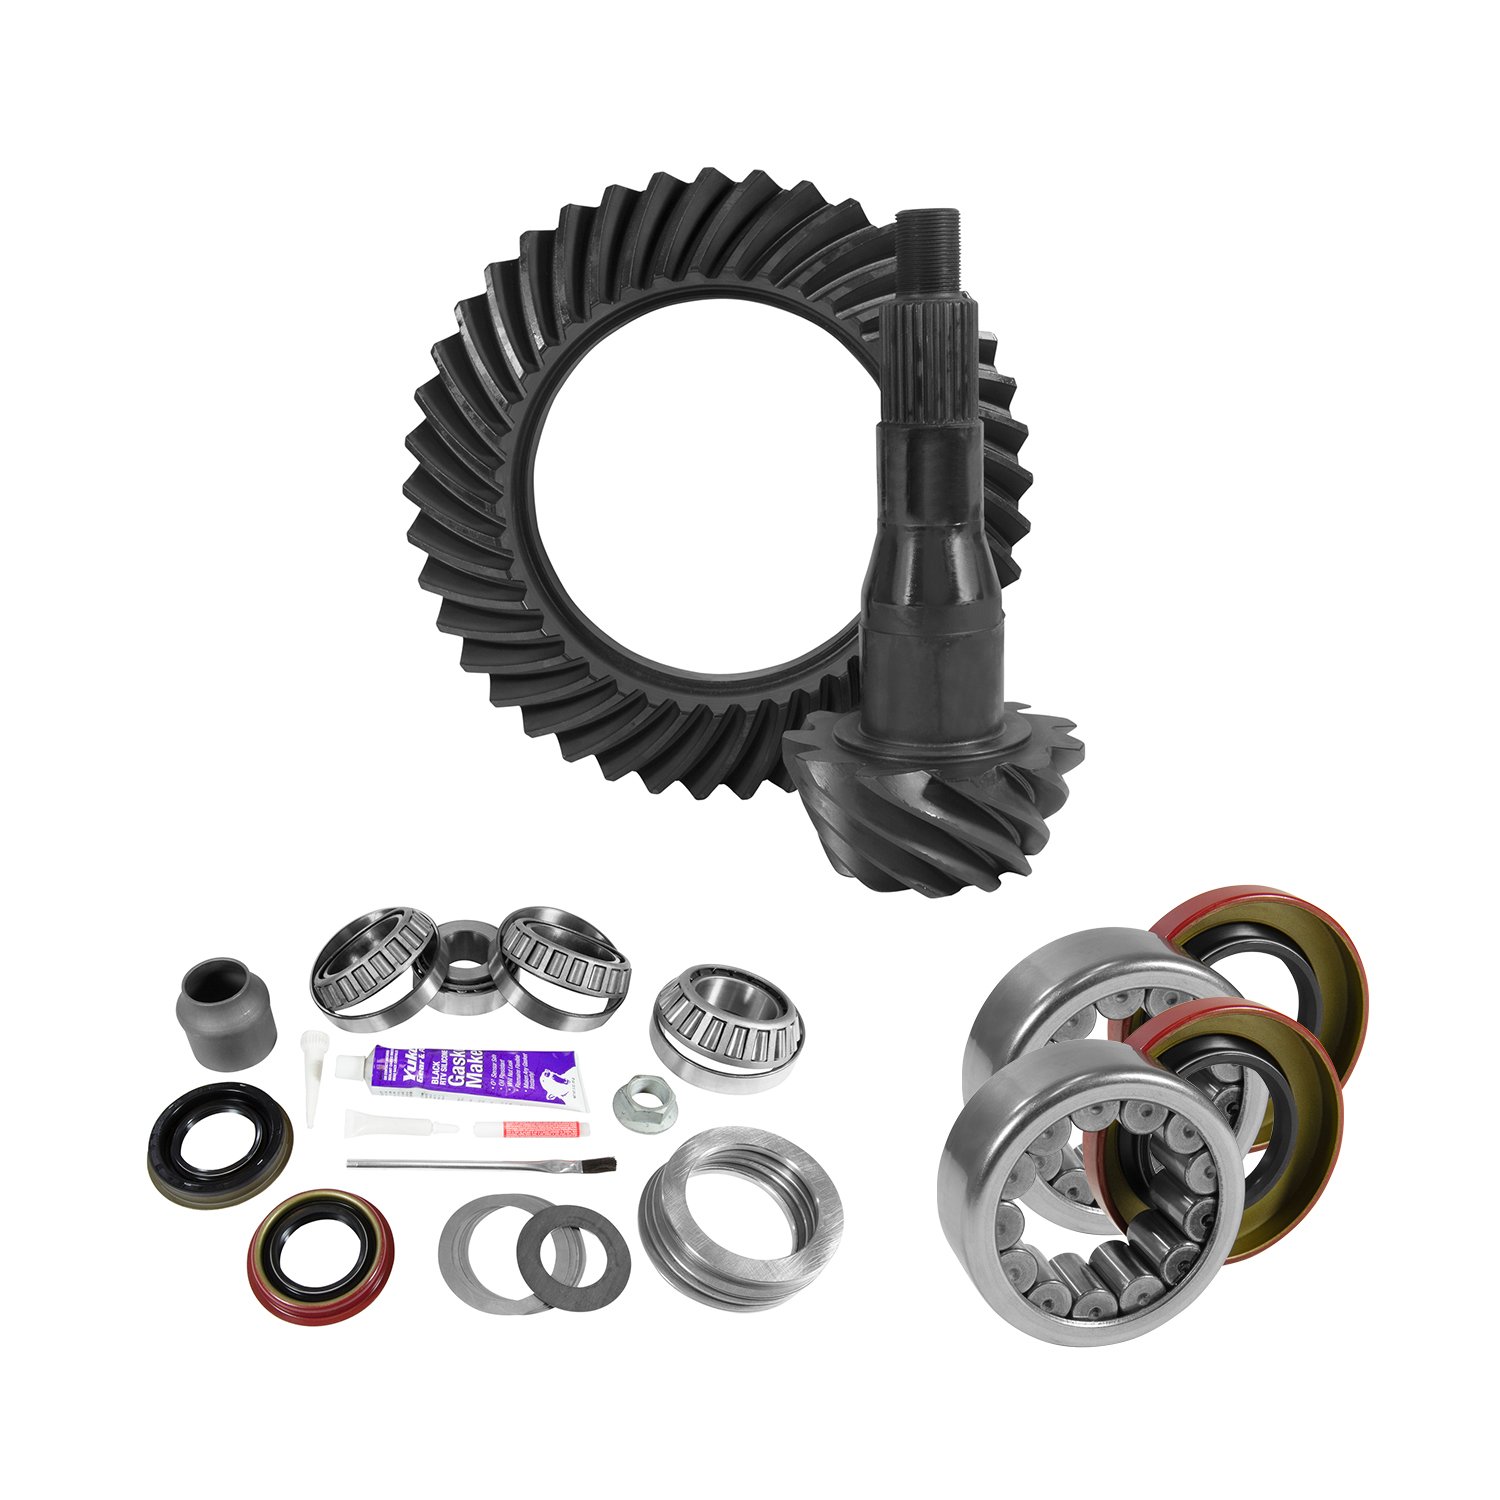 USA Standard 10805 9.75 in. Ford 3.55 Rear Ring & Pinion Install Kit, 2.99 in. Od Axle Bearings & Seals